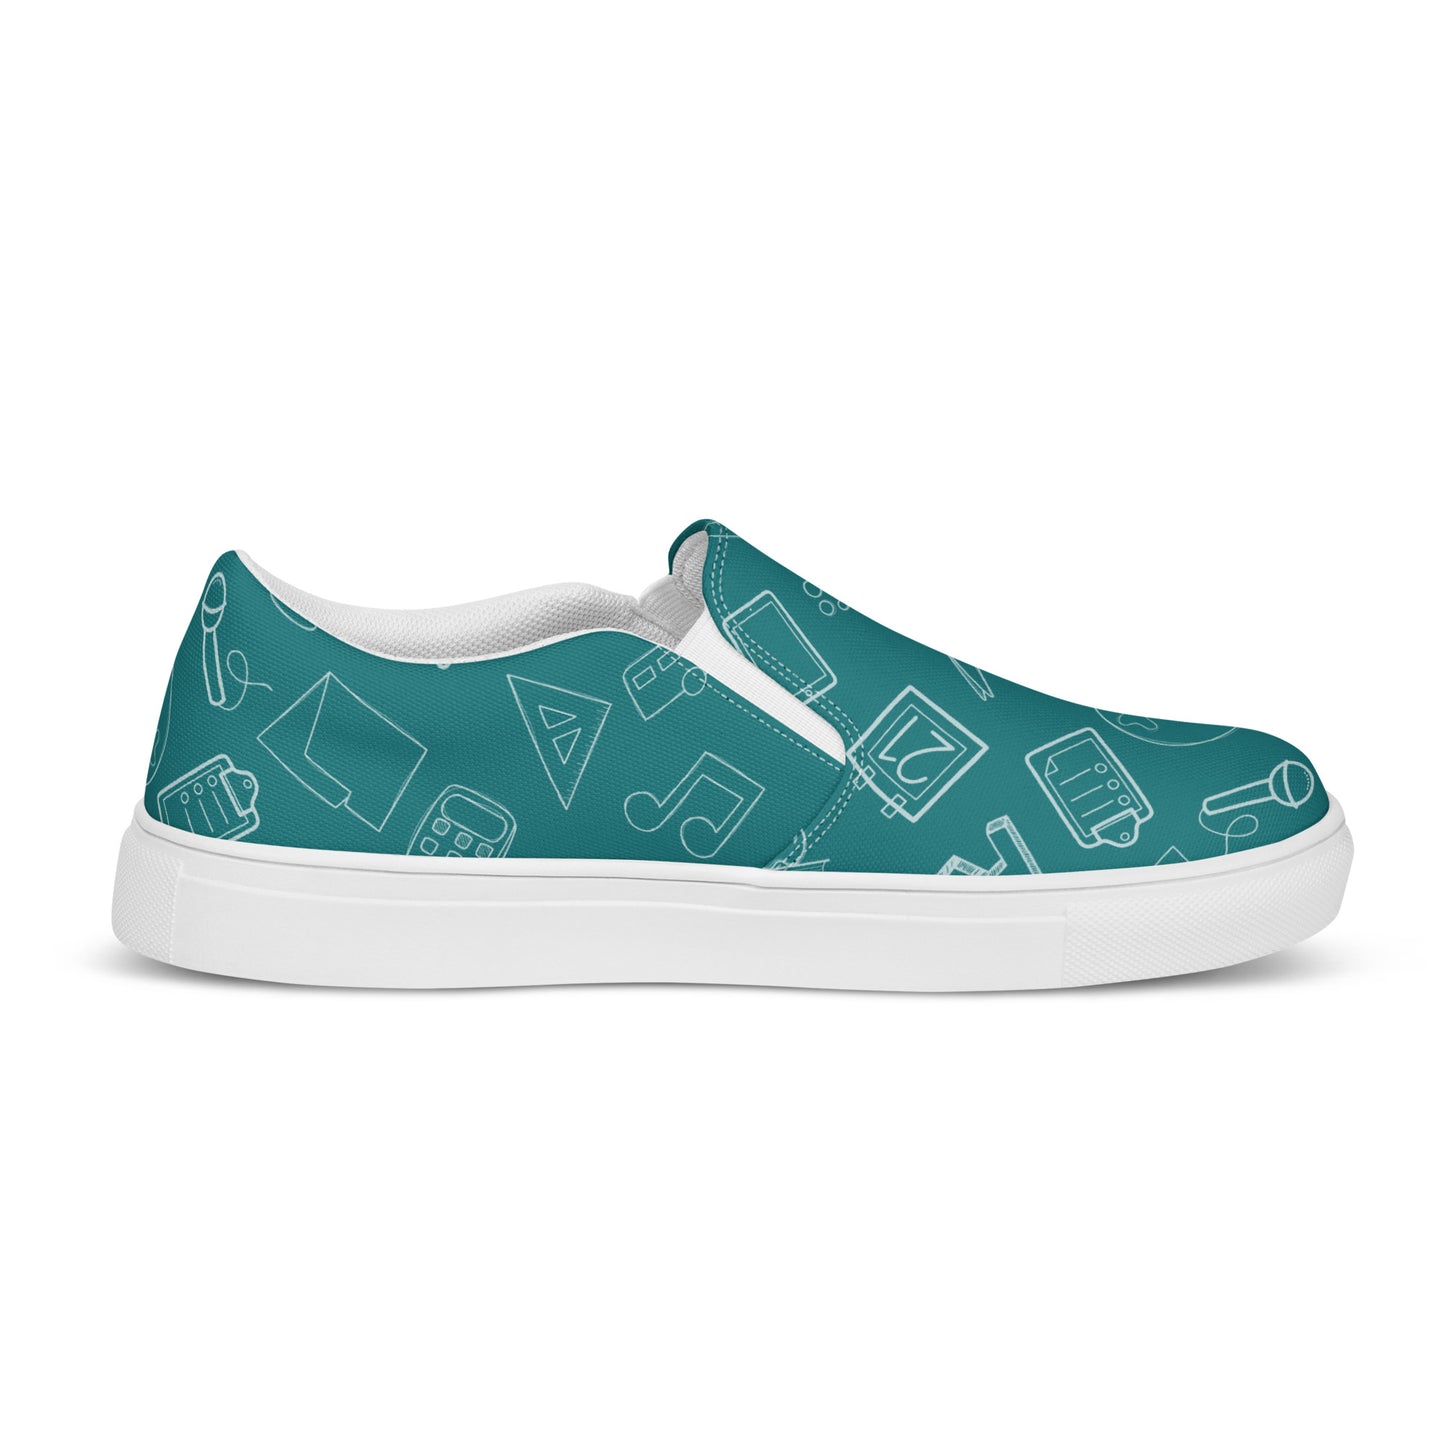 Teal Elementary Doodles Slip-on Canvas Shoes (Women's Sizes)